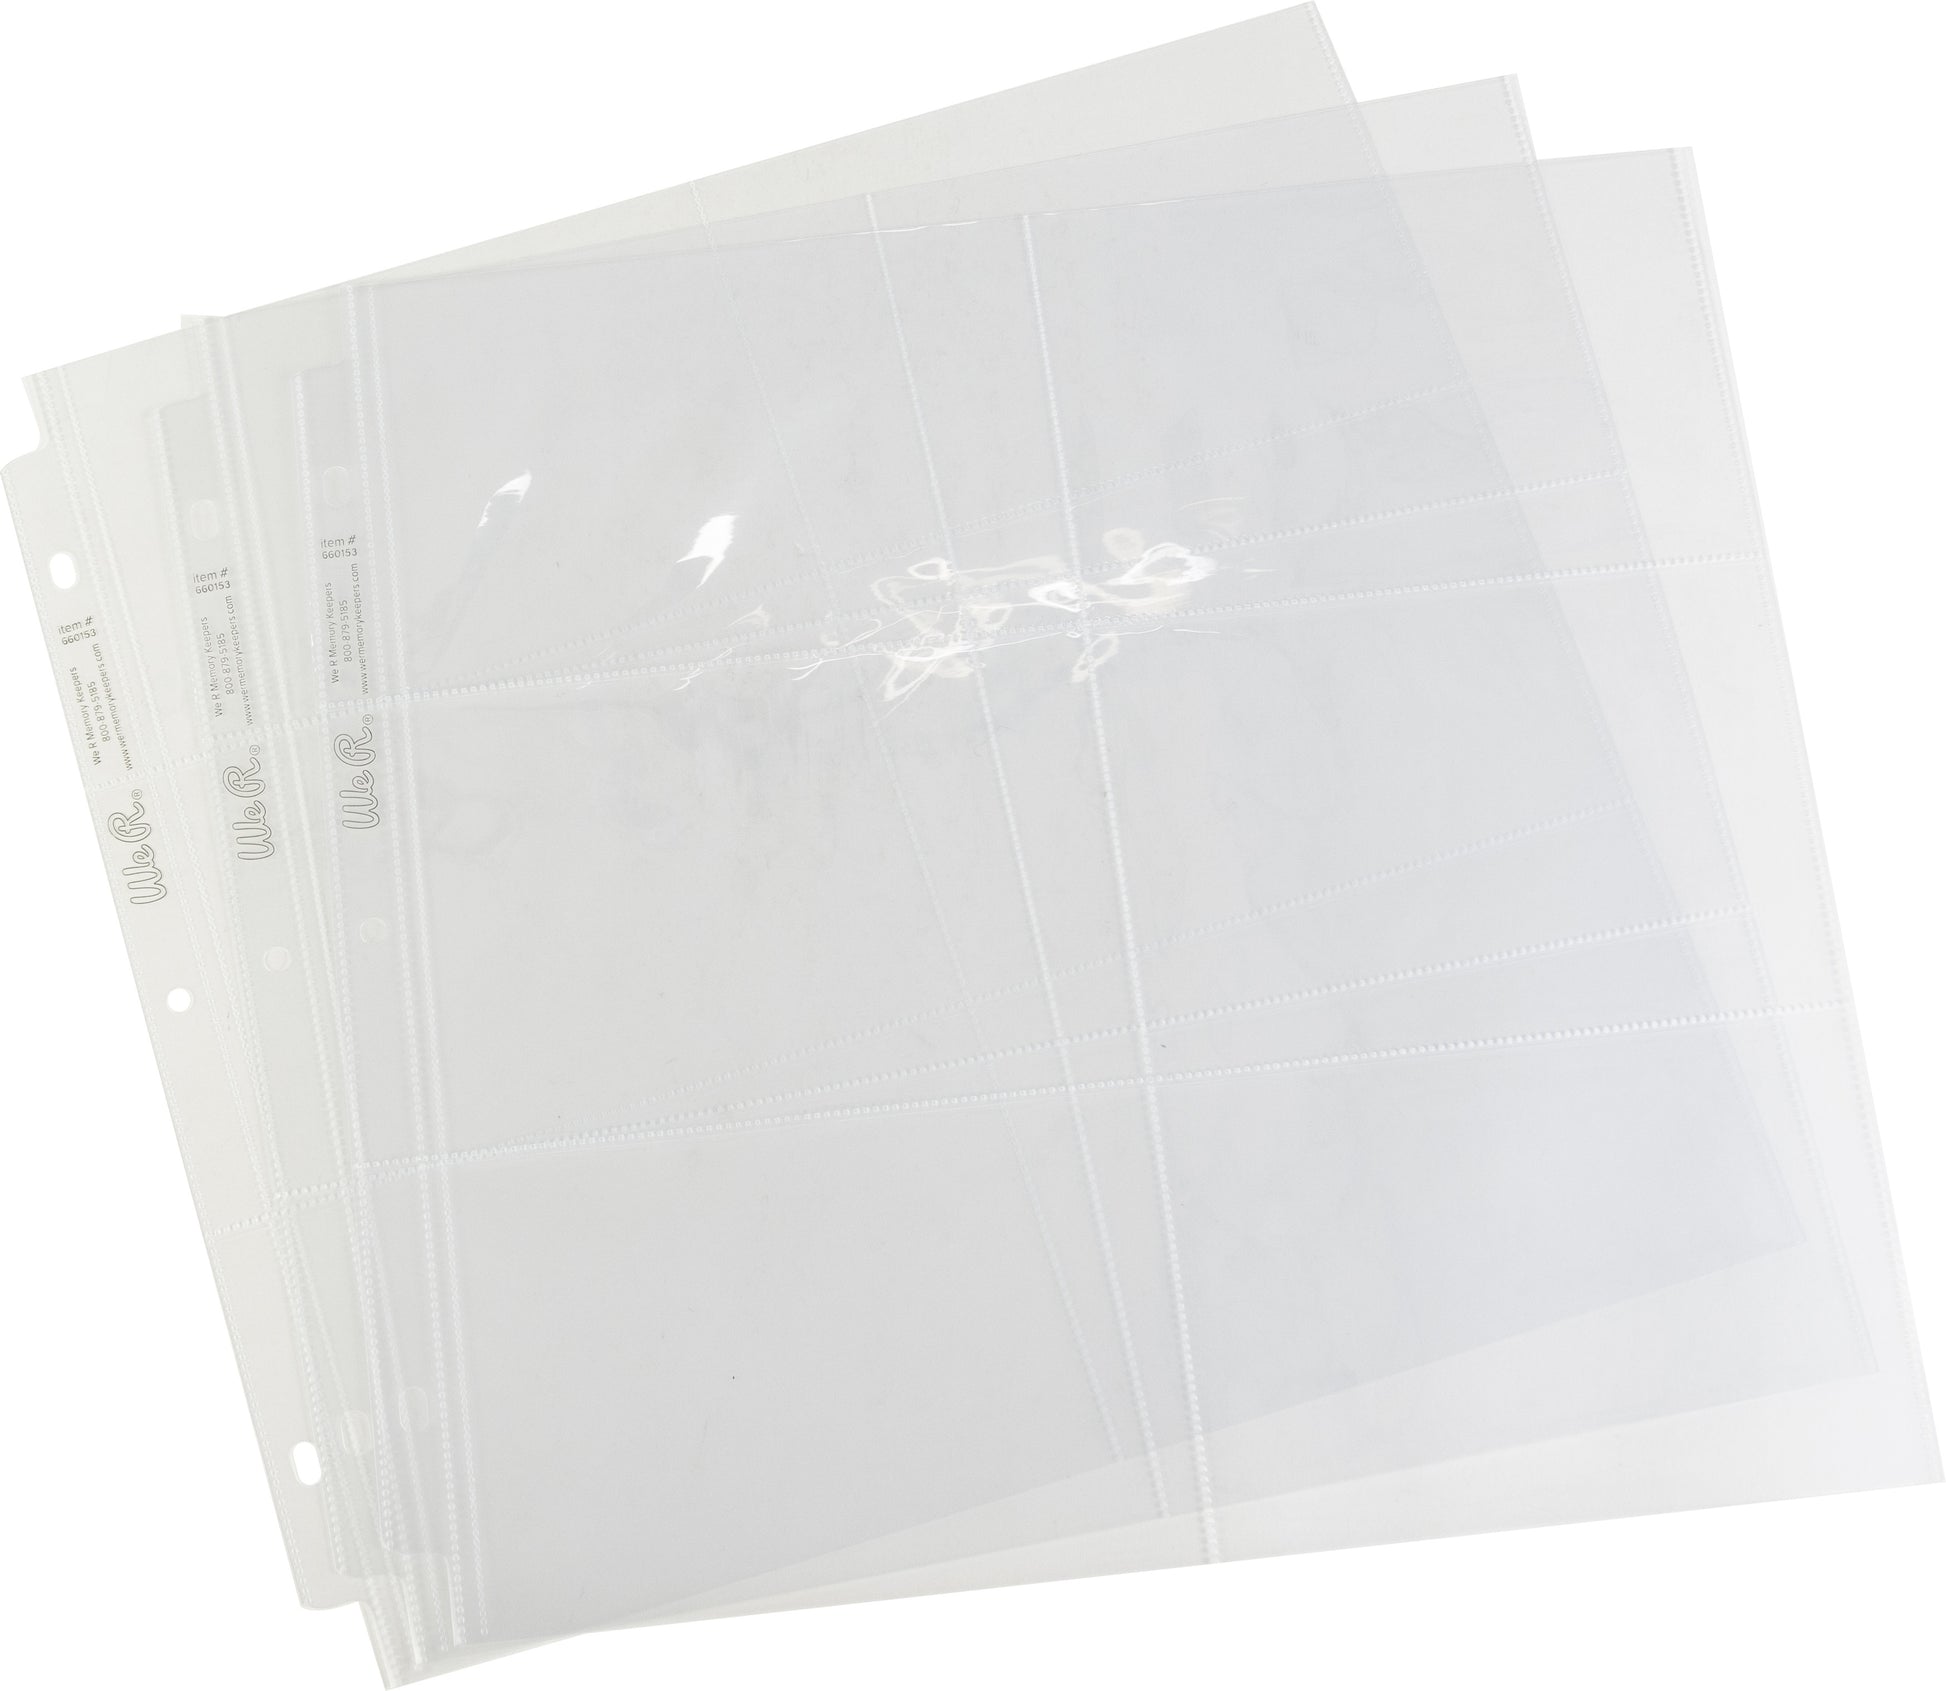 We R Memory Keepers 12x12 Photo Sleeves 10 pack, 3-4x6, 1-12x6 each page.  Ring